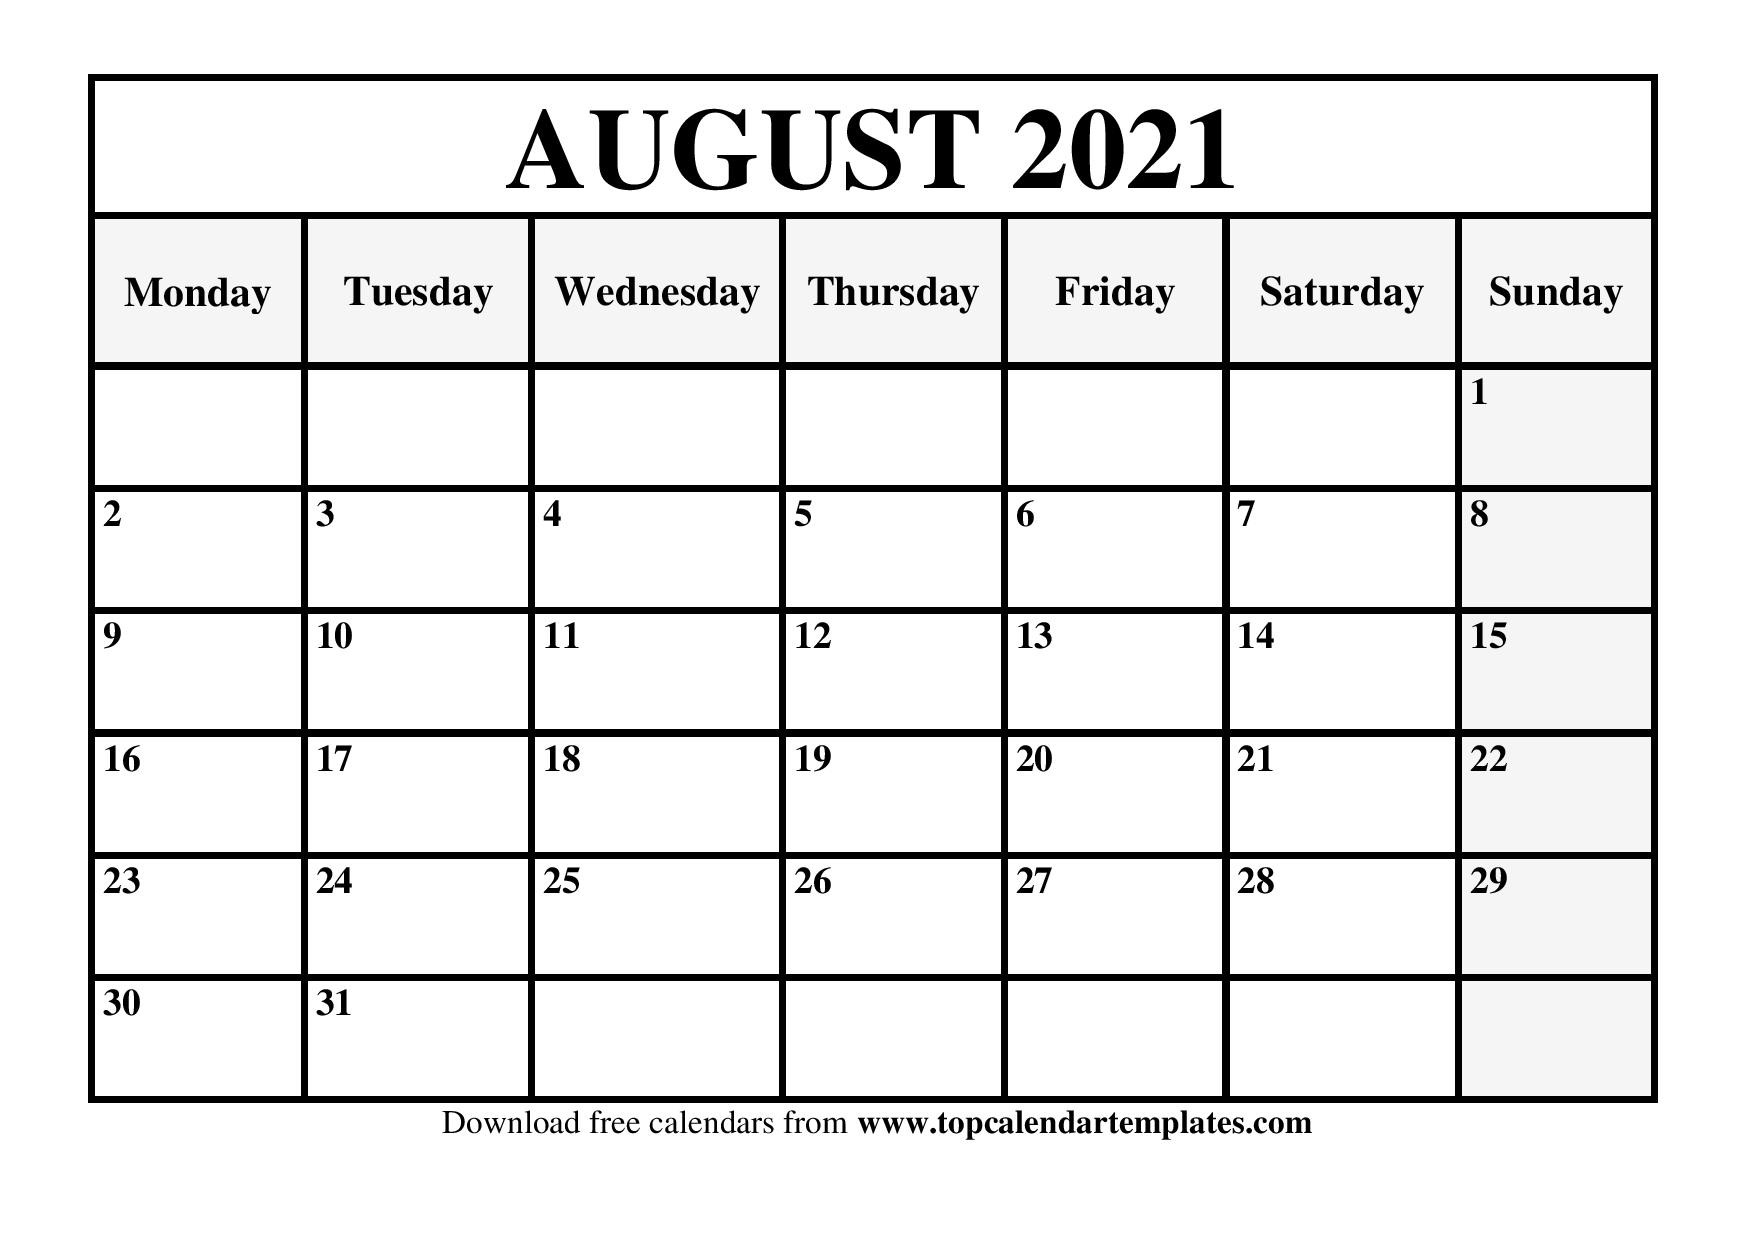 August 2021 Printable Calendar - Monthly Templates-Printable Free 2021 Calendar Without Downloading